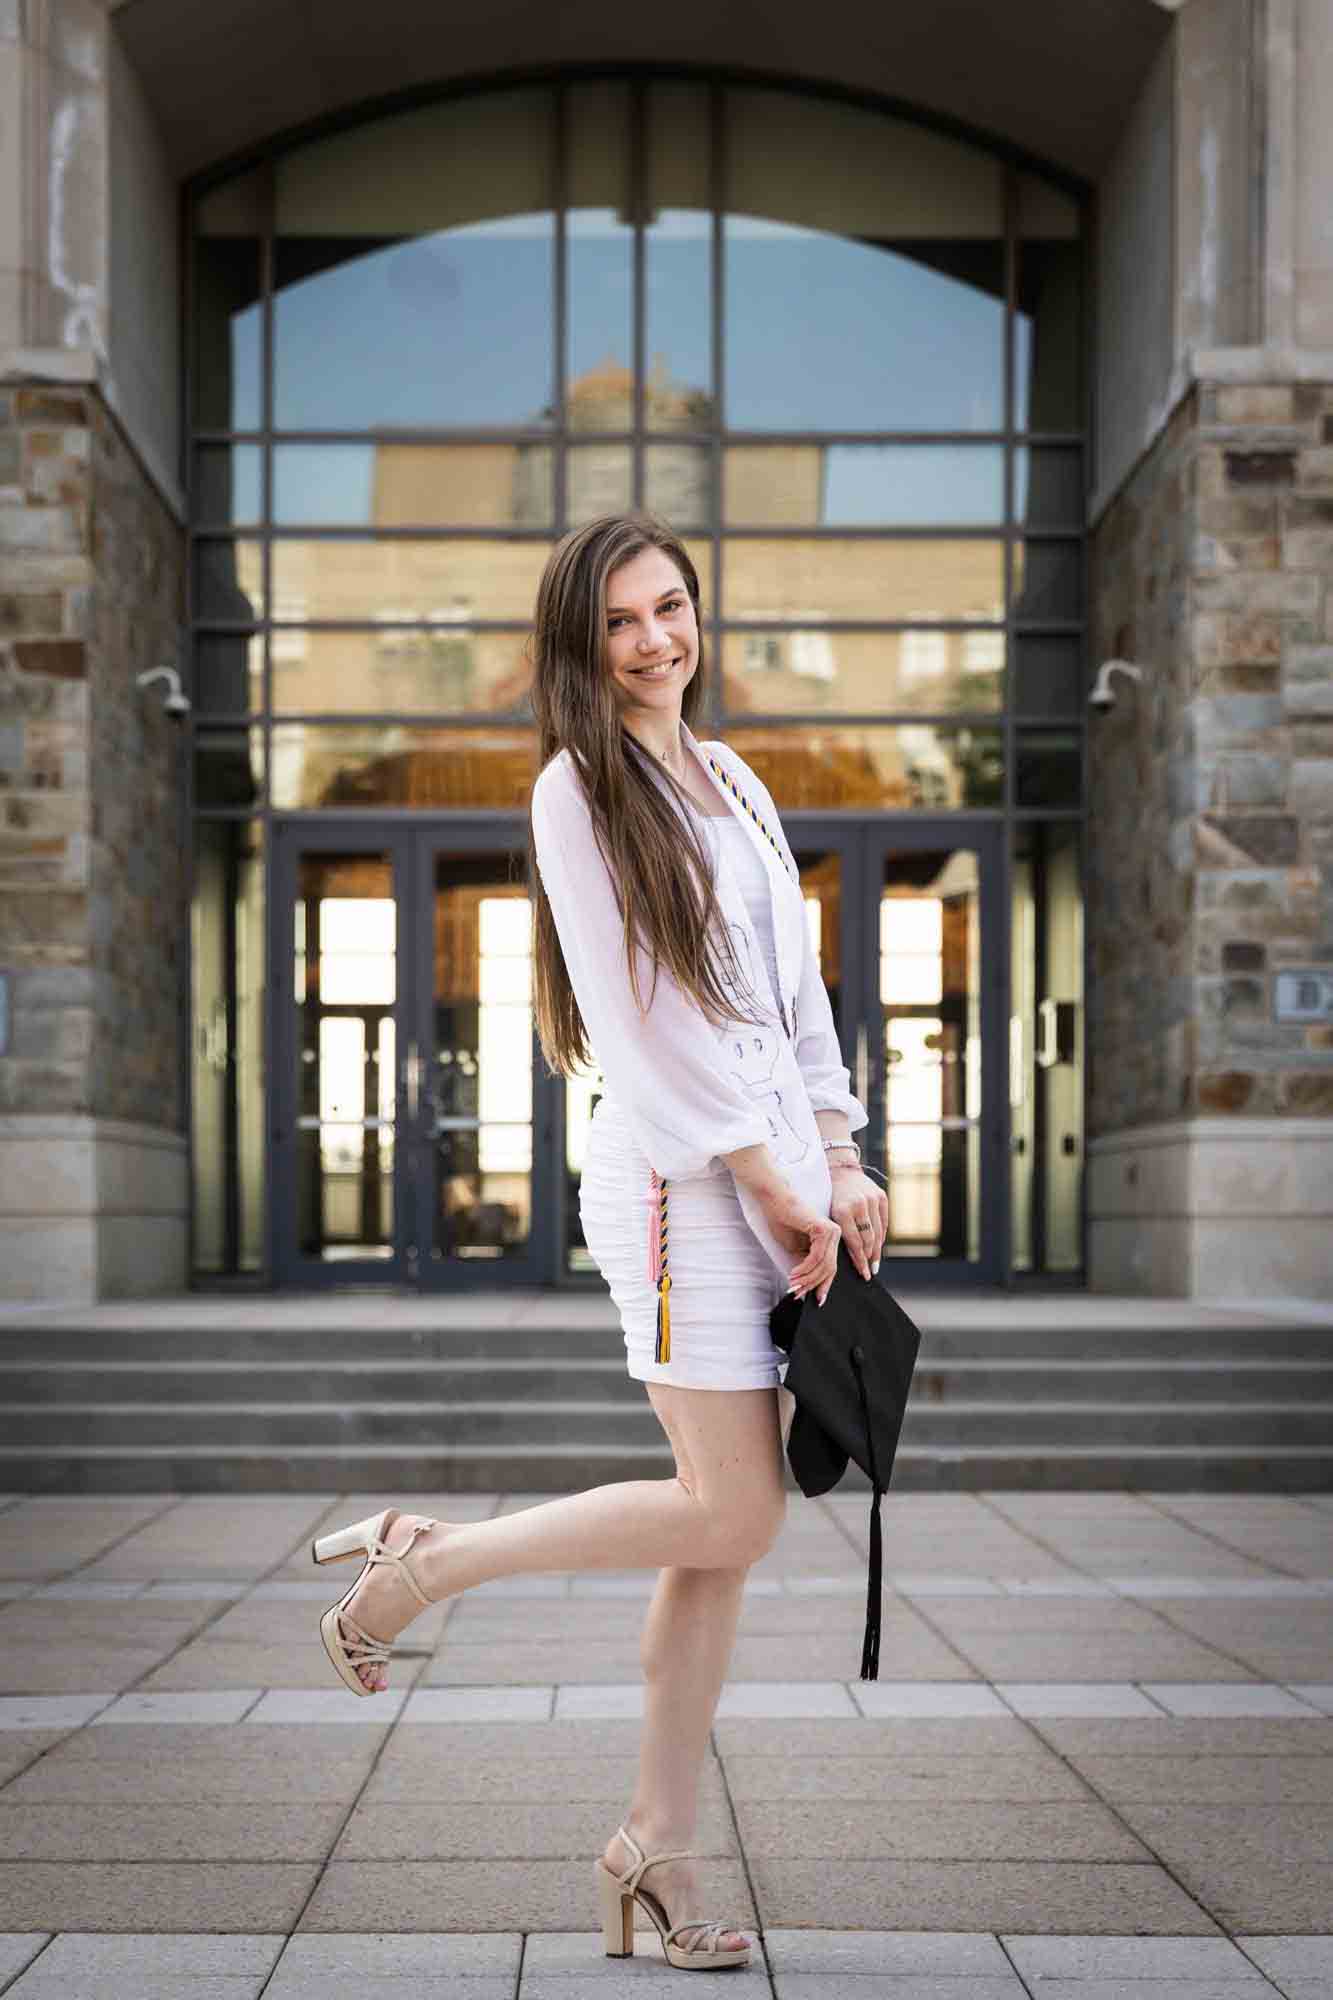 Female graduate wearing white dress and holding cap with leg up during a St. John’s University graduate portrait session